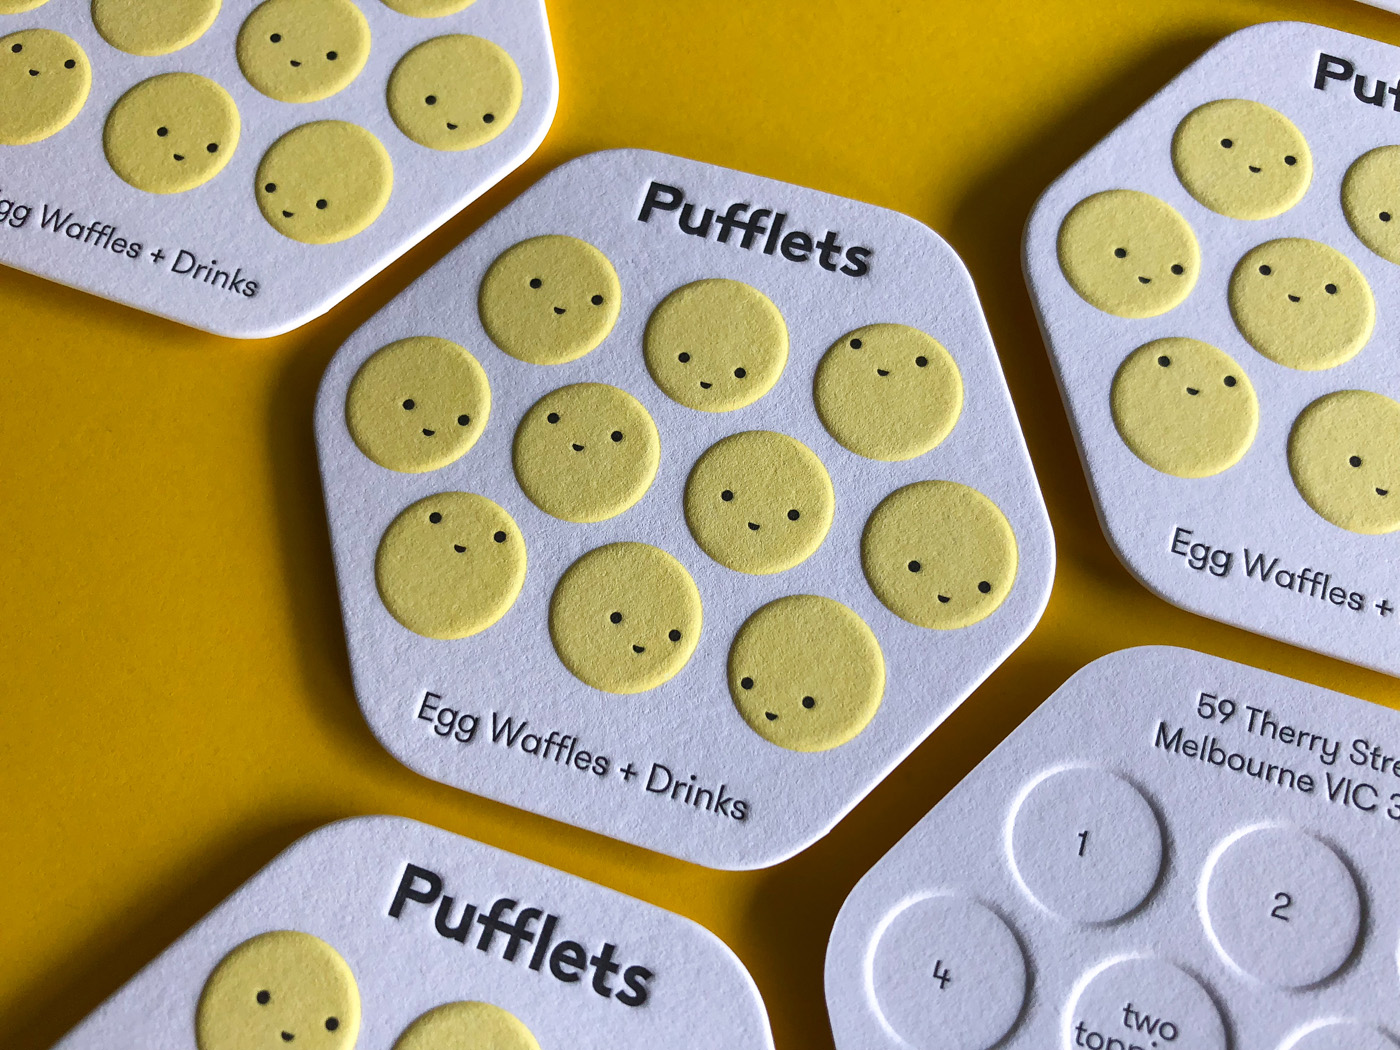 Unique letterpress embossed debossed loyalty cards for Pufflets on Savoy 4